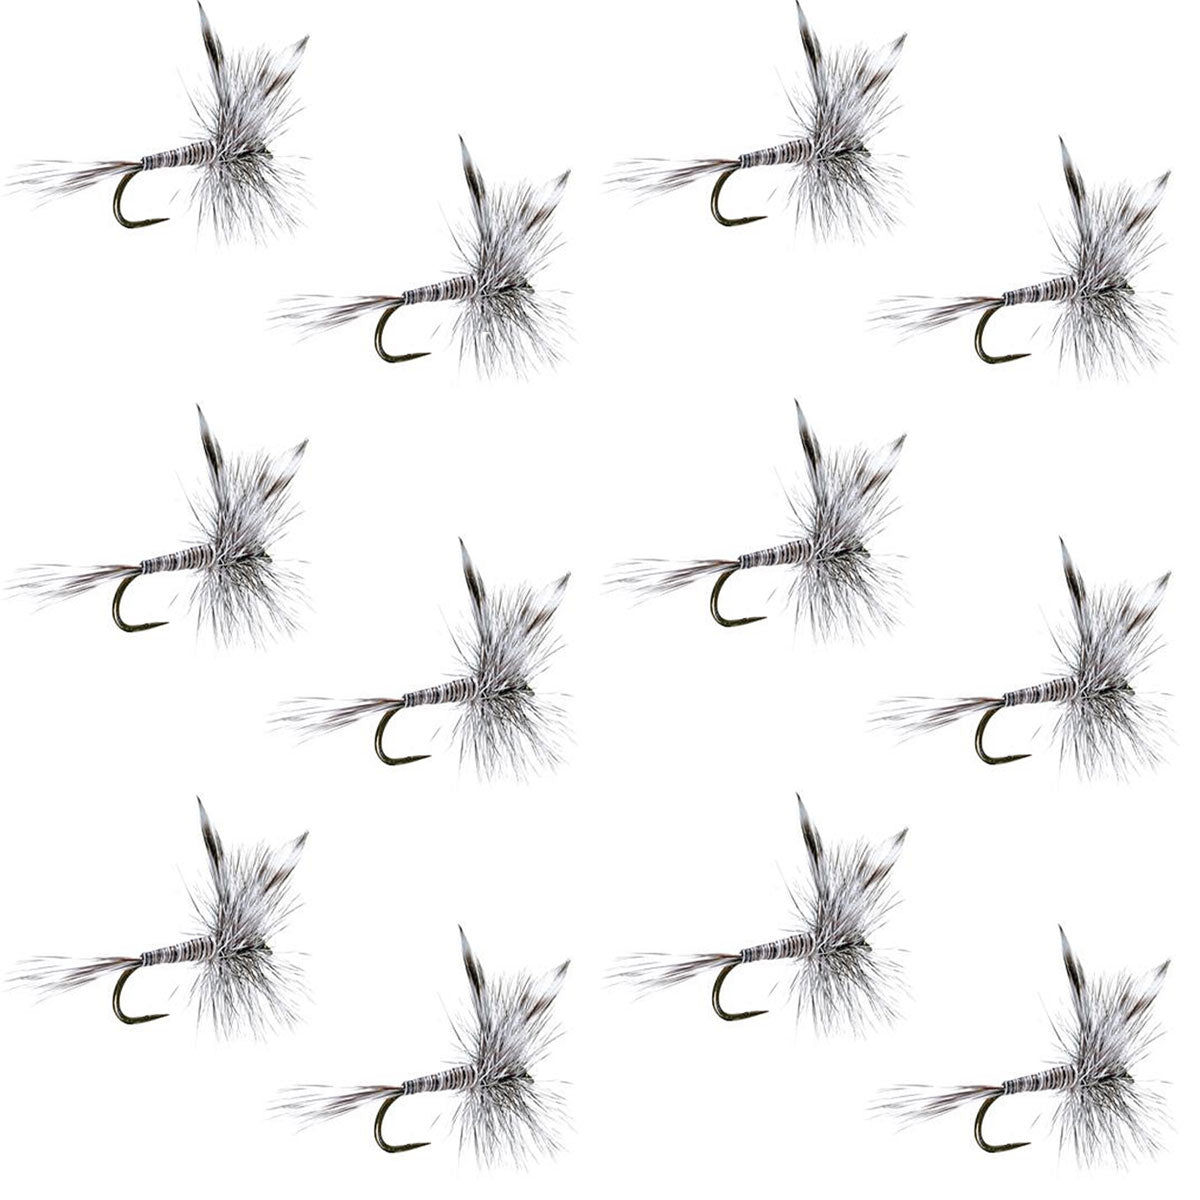 Barbless Mosquito Classic Trout Dry Fly Fishing 1 Dozen Flies - Hook Size 12